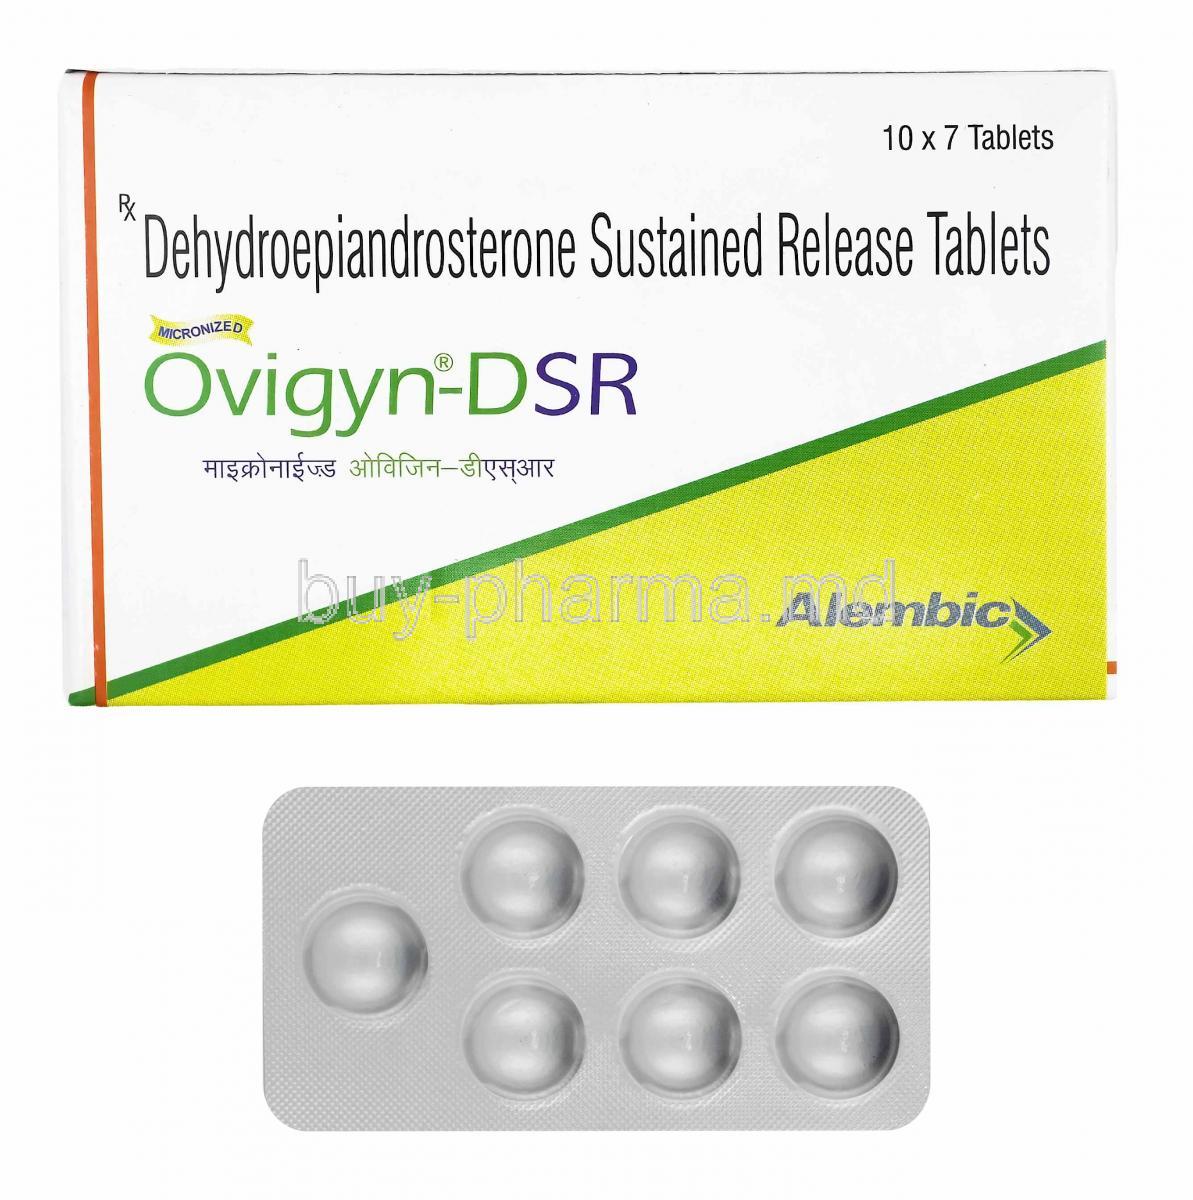 Ovigyn-D, Dehydroepiandrosterone box and tablets